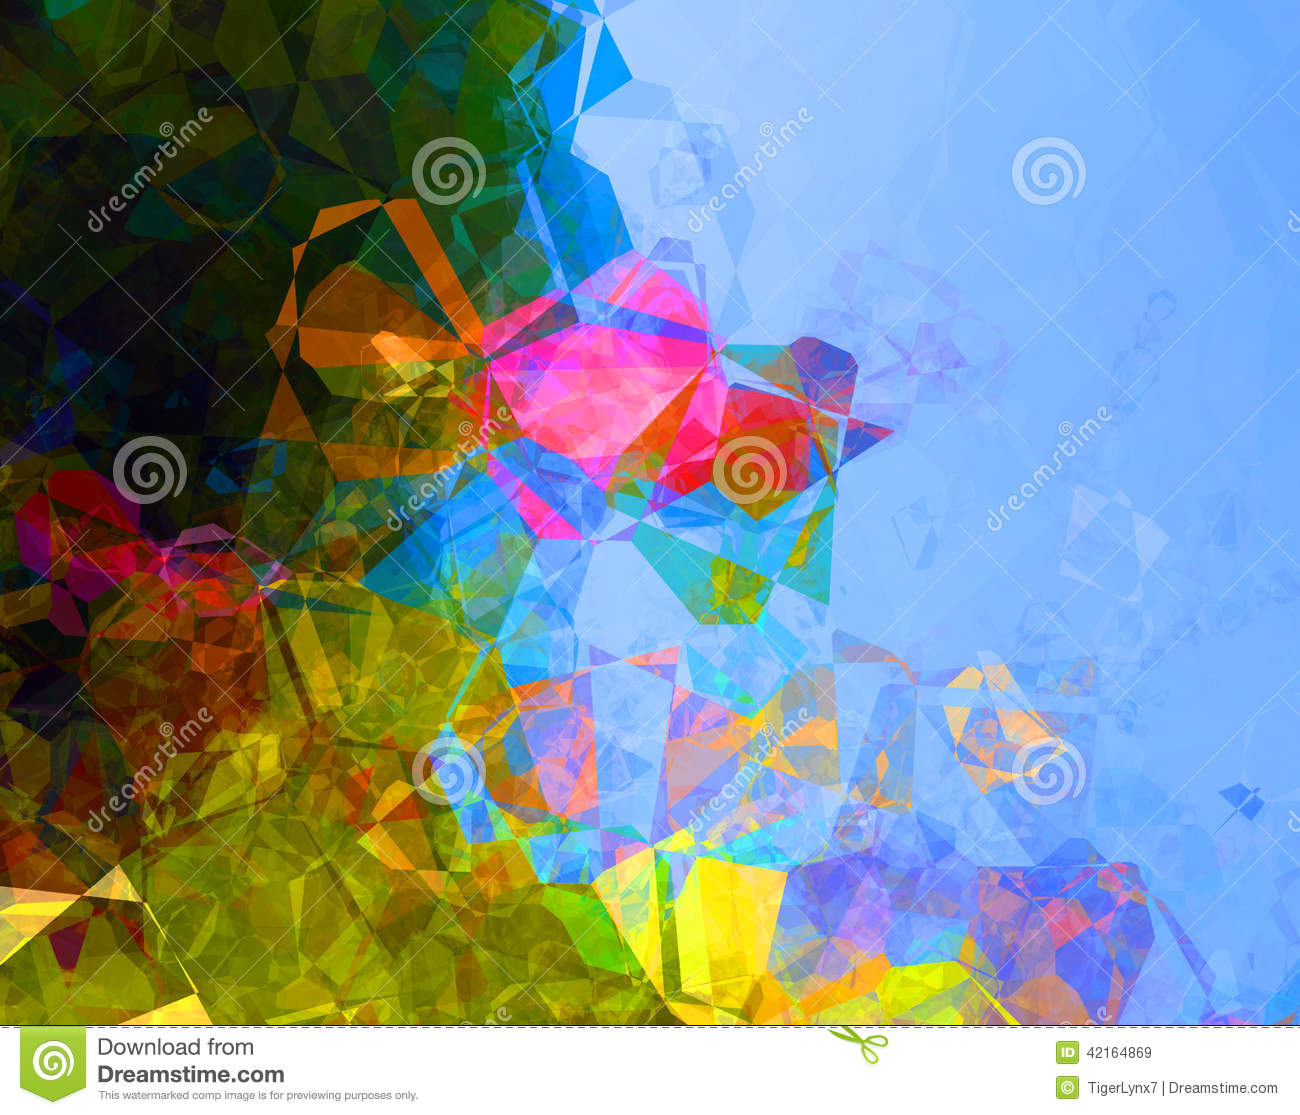 Other Polygon Shapes Blue Green Abstract Background Digital